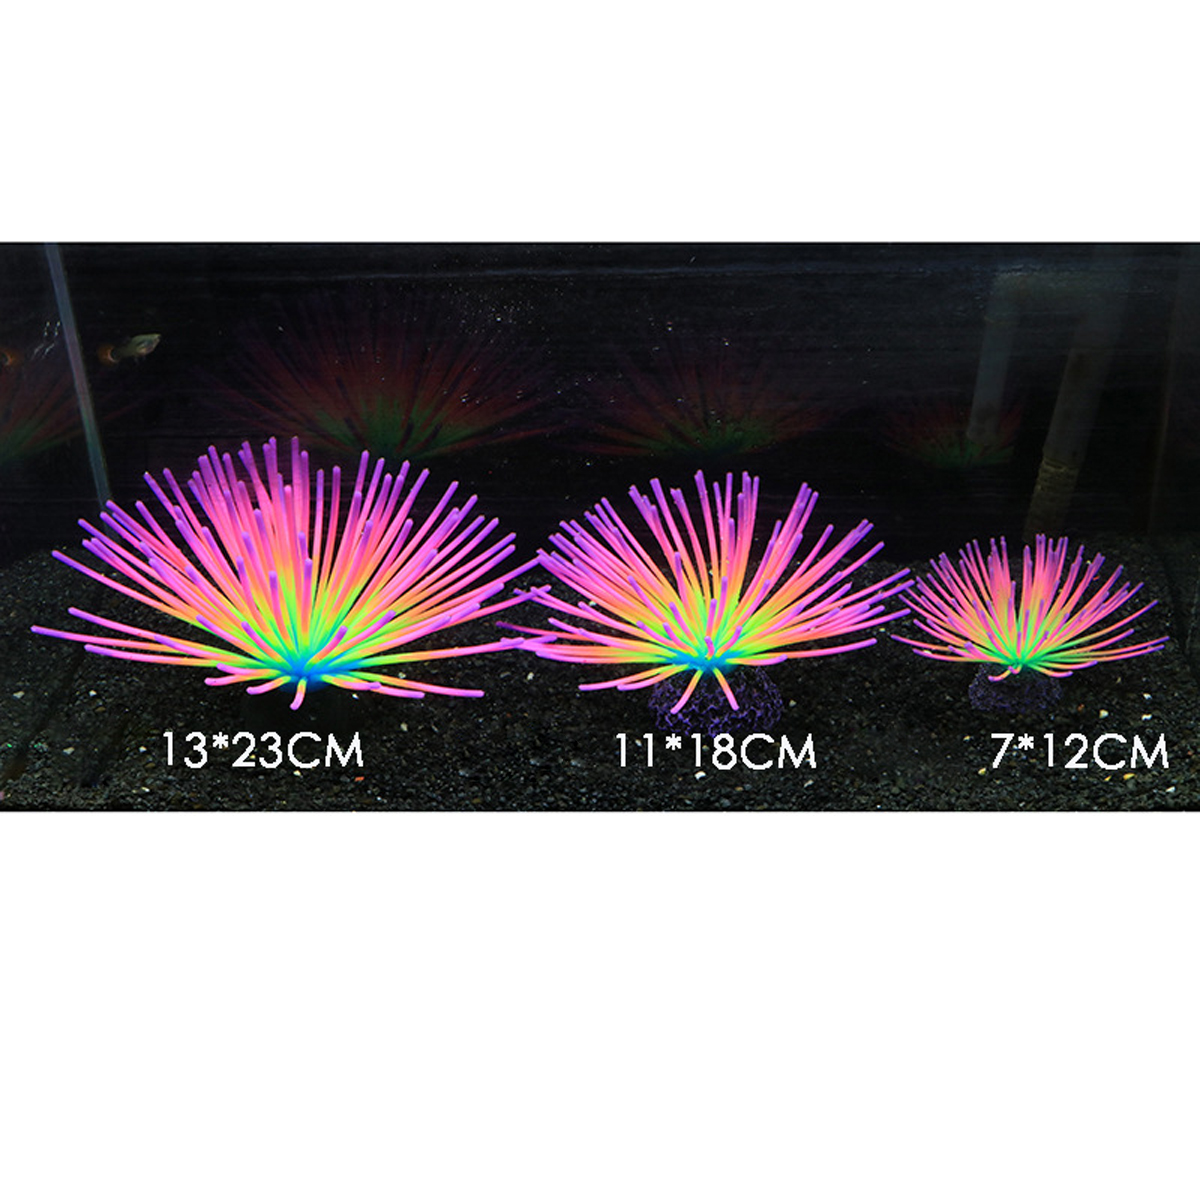 1/2/6/10pcs Aquarium Imitative Rainbow and Iridescent Blue Sea Urchin Balls Artificial Silicone Ornament Set with Glowing Effect for Fish Tank Landscape Decoration - image 2 of 2